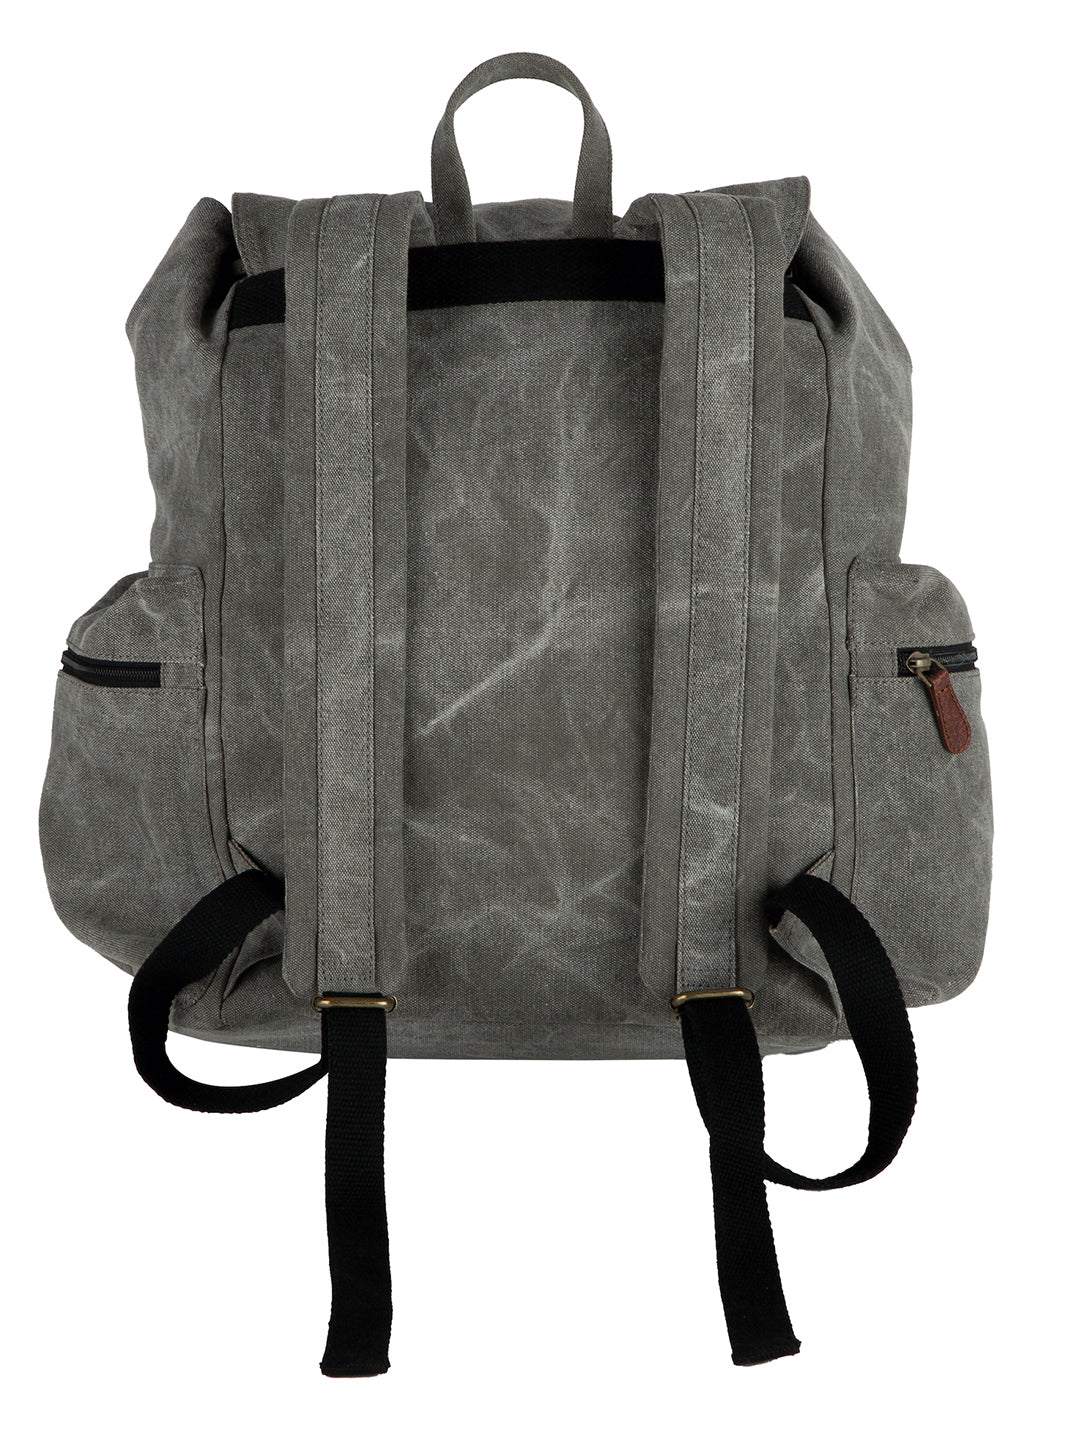 Mona B upcycled canvas back pack for office | school and college with upto 14” laptop/ Mac Book/ tablet: Dream